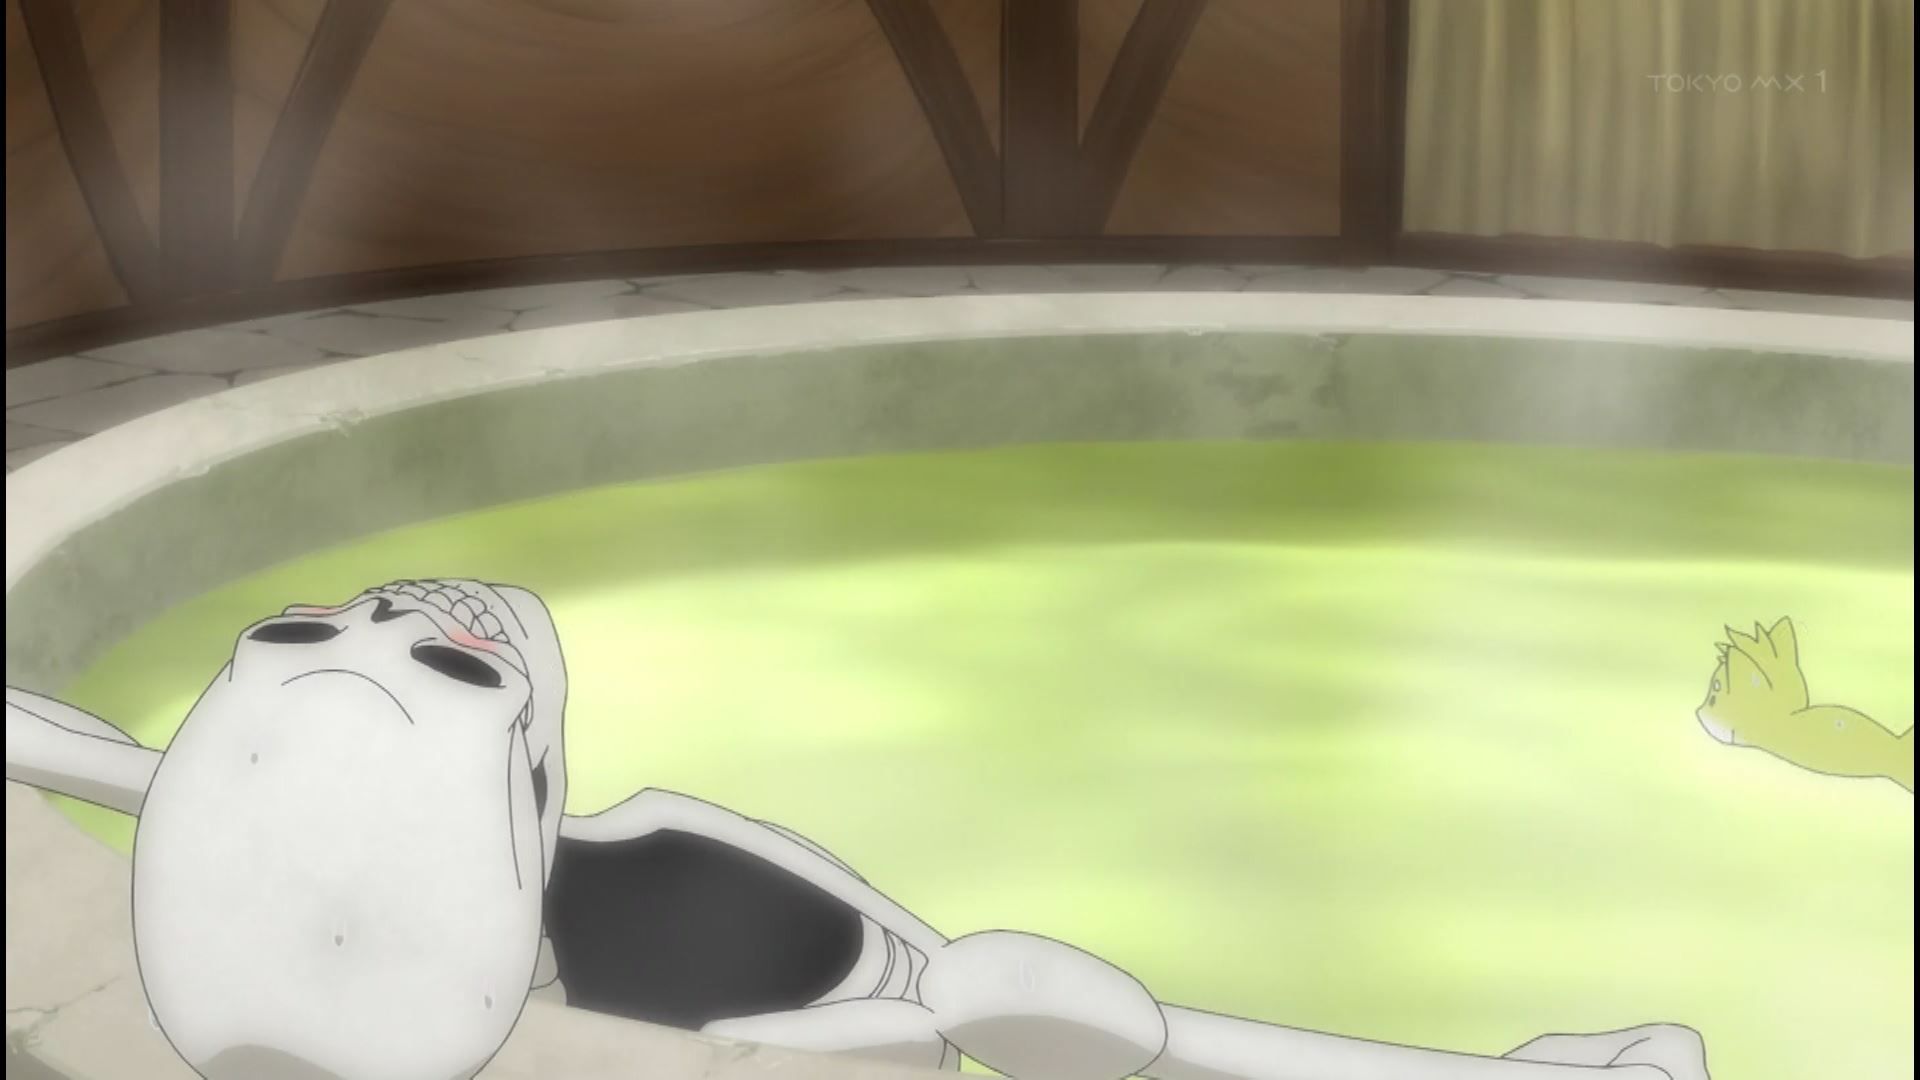 In episode 6 of the anime "Skeleton Knight, I'm Going Out to Another World" a girl takes off her clothes and looks completely naked and erotic 8